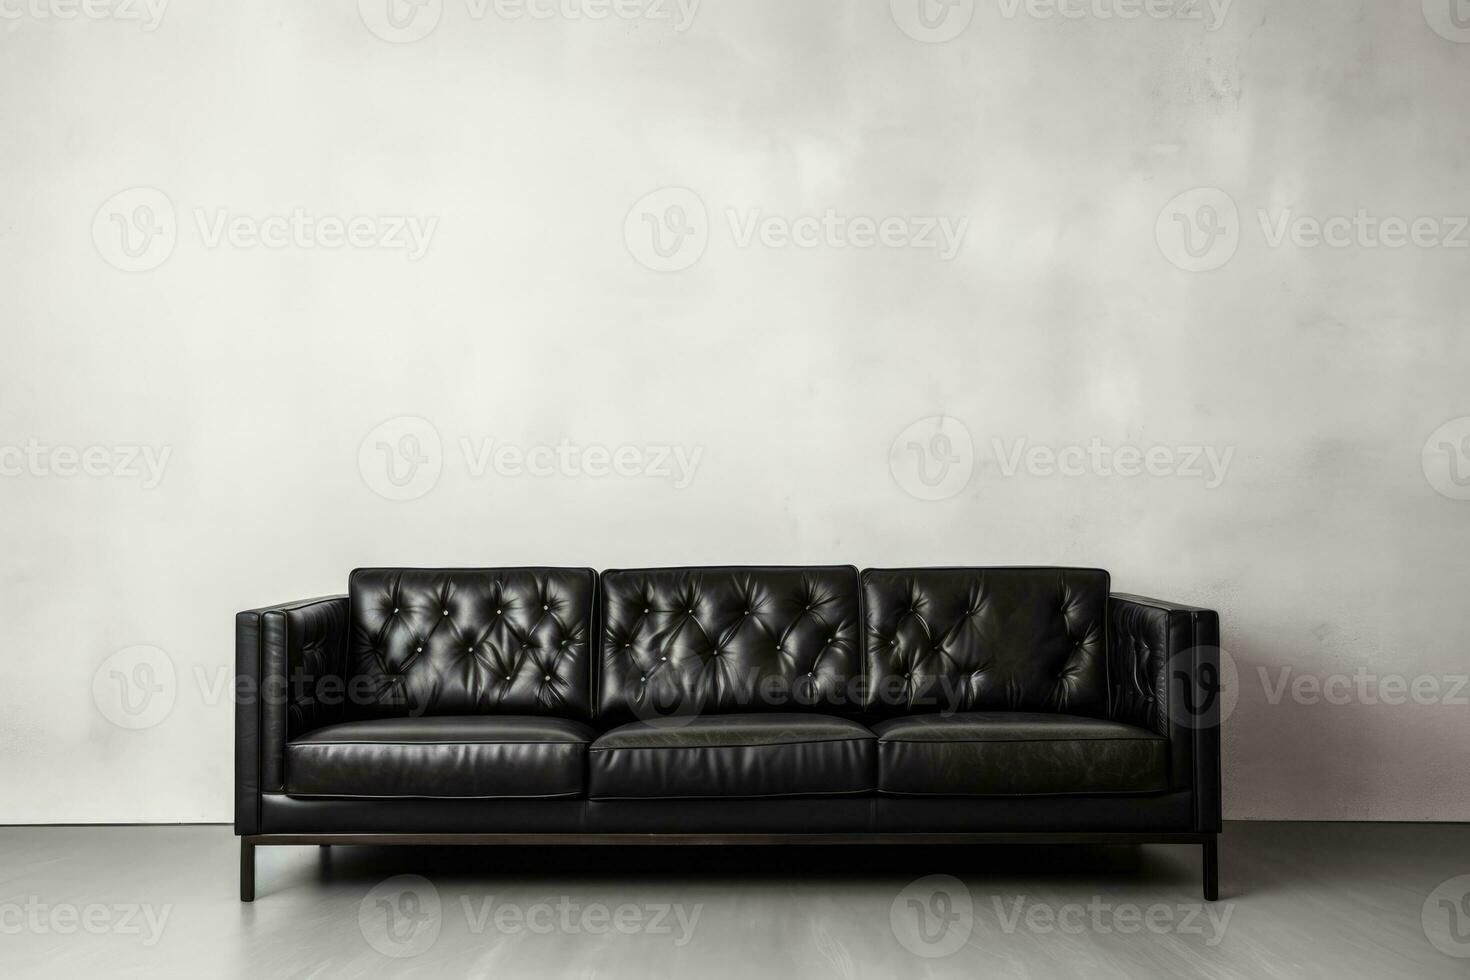 Black sofa against white wall background in close up shot photo